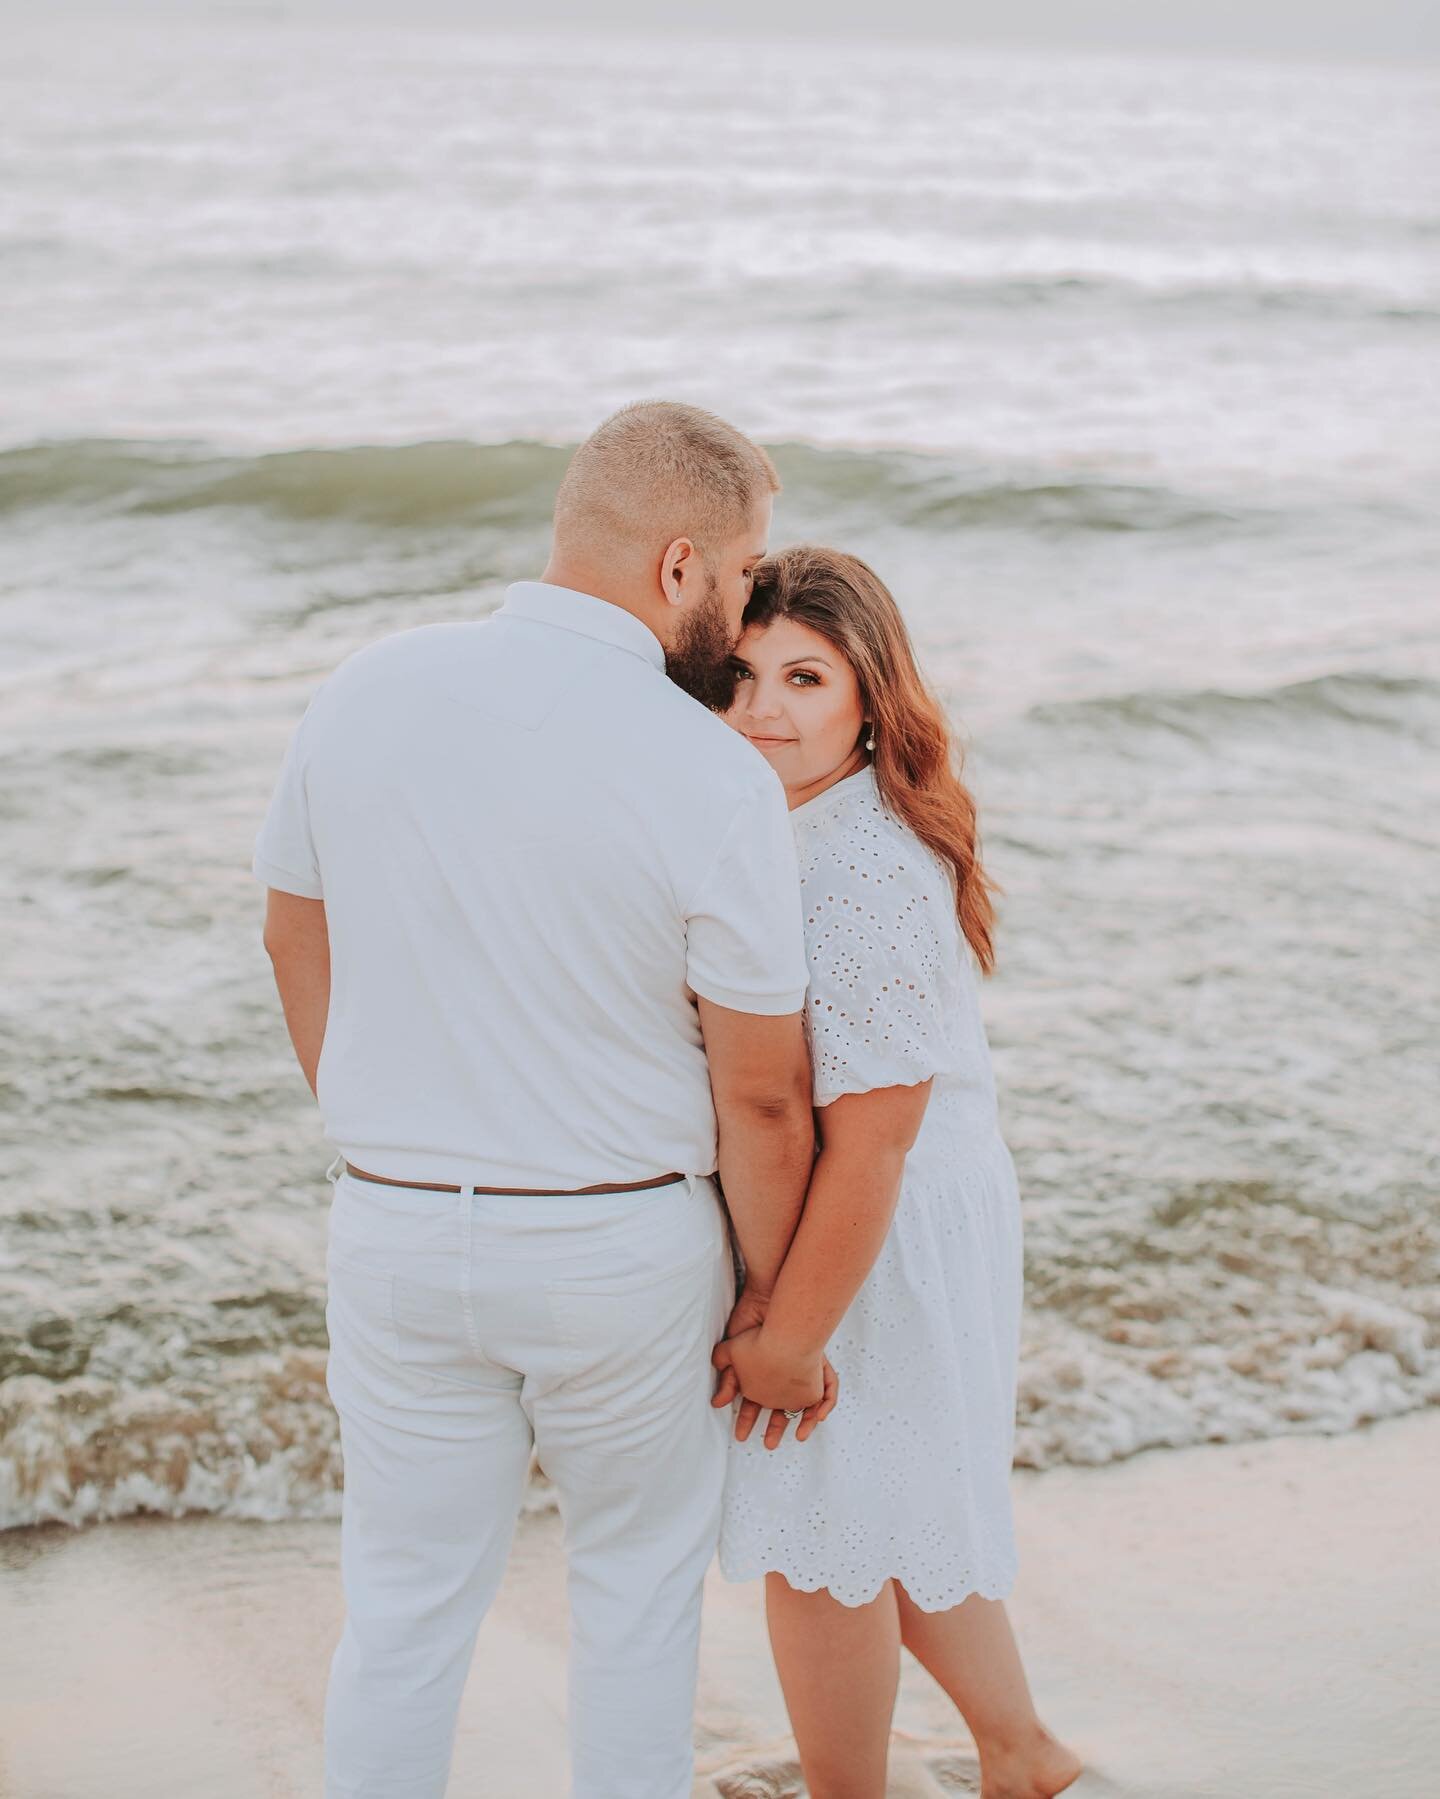 Got to spend some time with Abby &amp; Livan at the beach for their engagement session! 

I met Abby a few years ago for her sisters senior pictures . And again for her senior pictures !

I snuck in this beach location at the end of their session , A